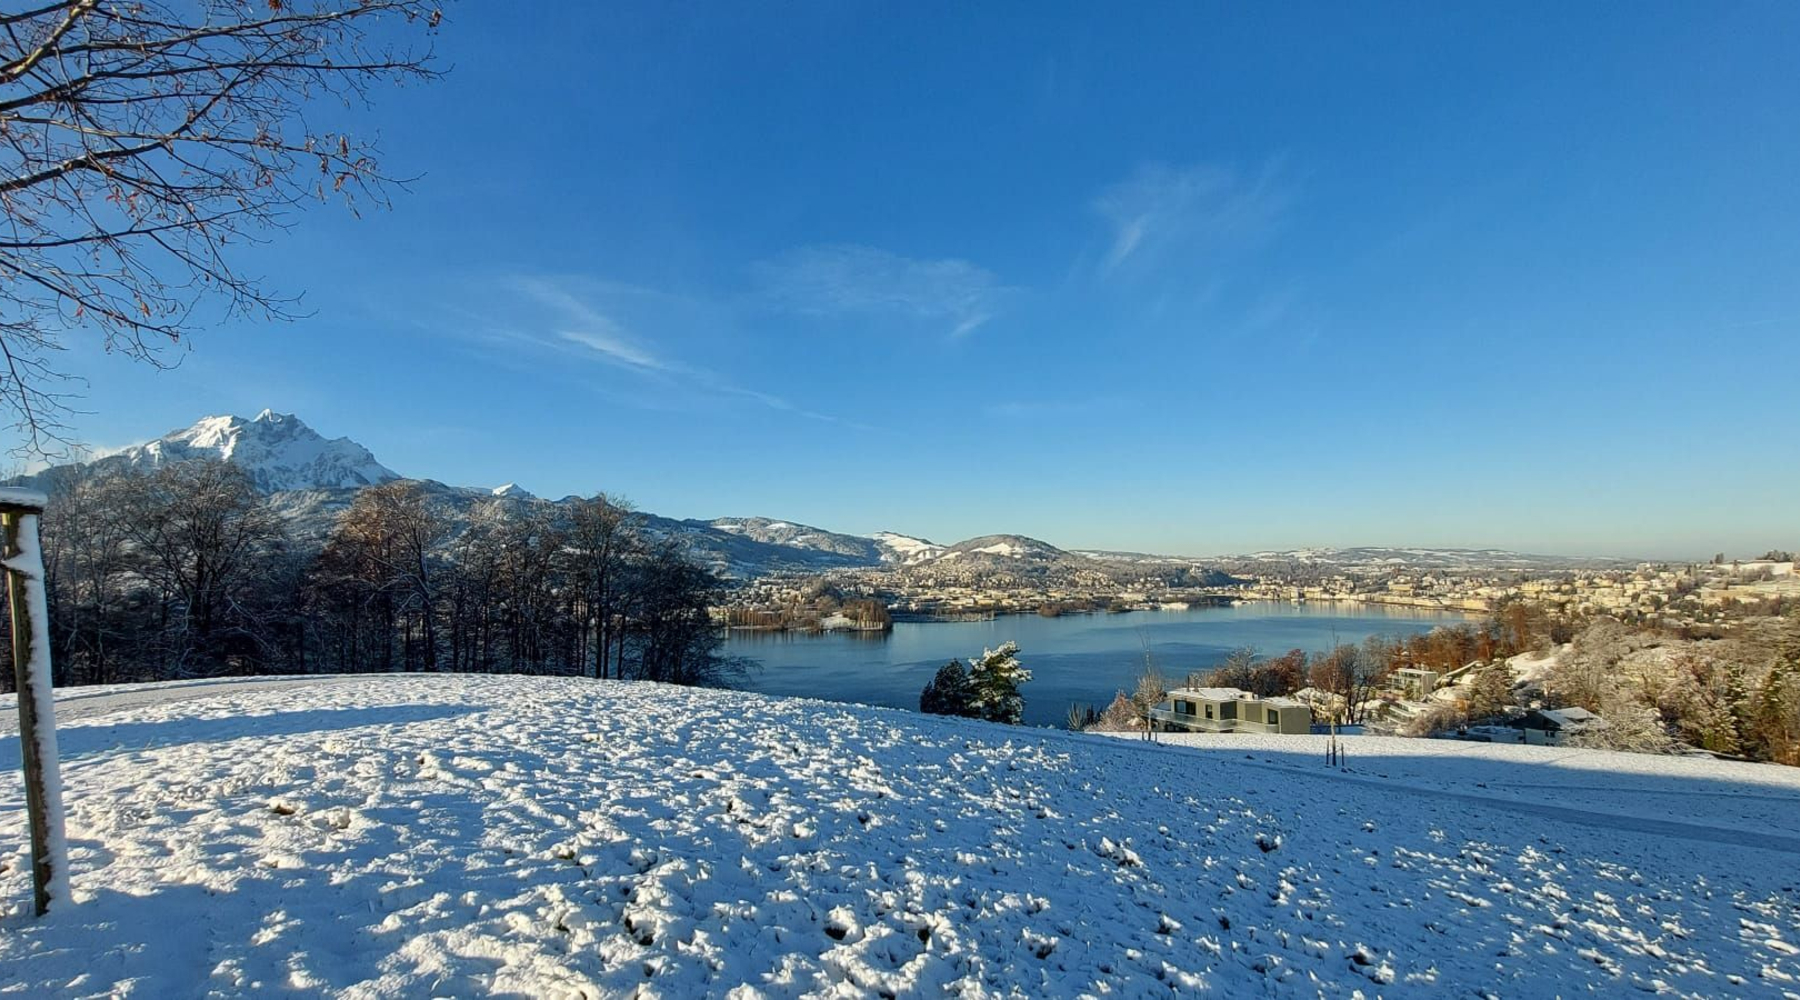 <span class='cycle-icon HIKING'></span><span class='cycle-title'>HIKING</span><span class='cycle-subtitle'>2.5 km long circular trail with a fantastic view of the city of Lucerne, the lake and the mountains</span>